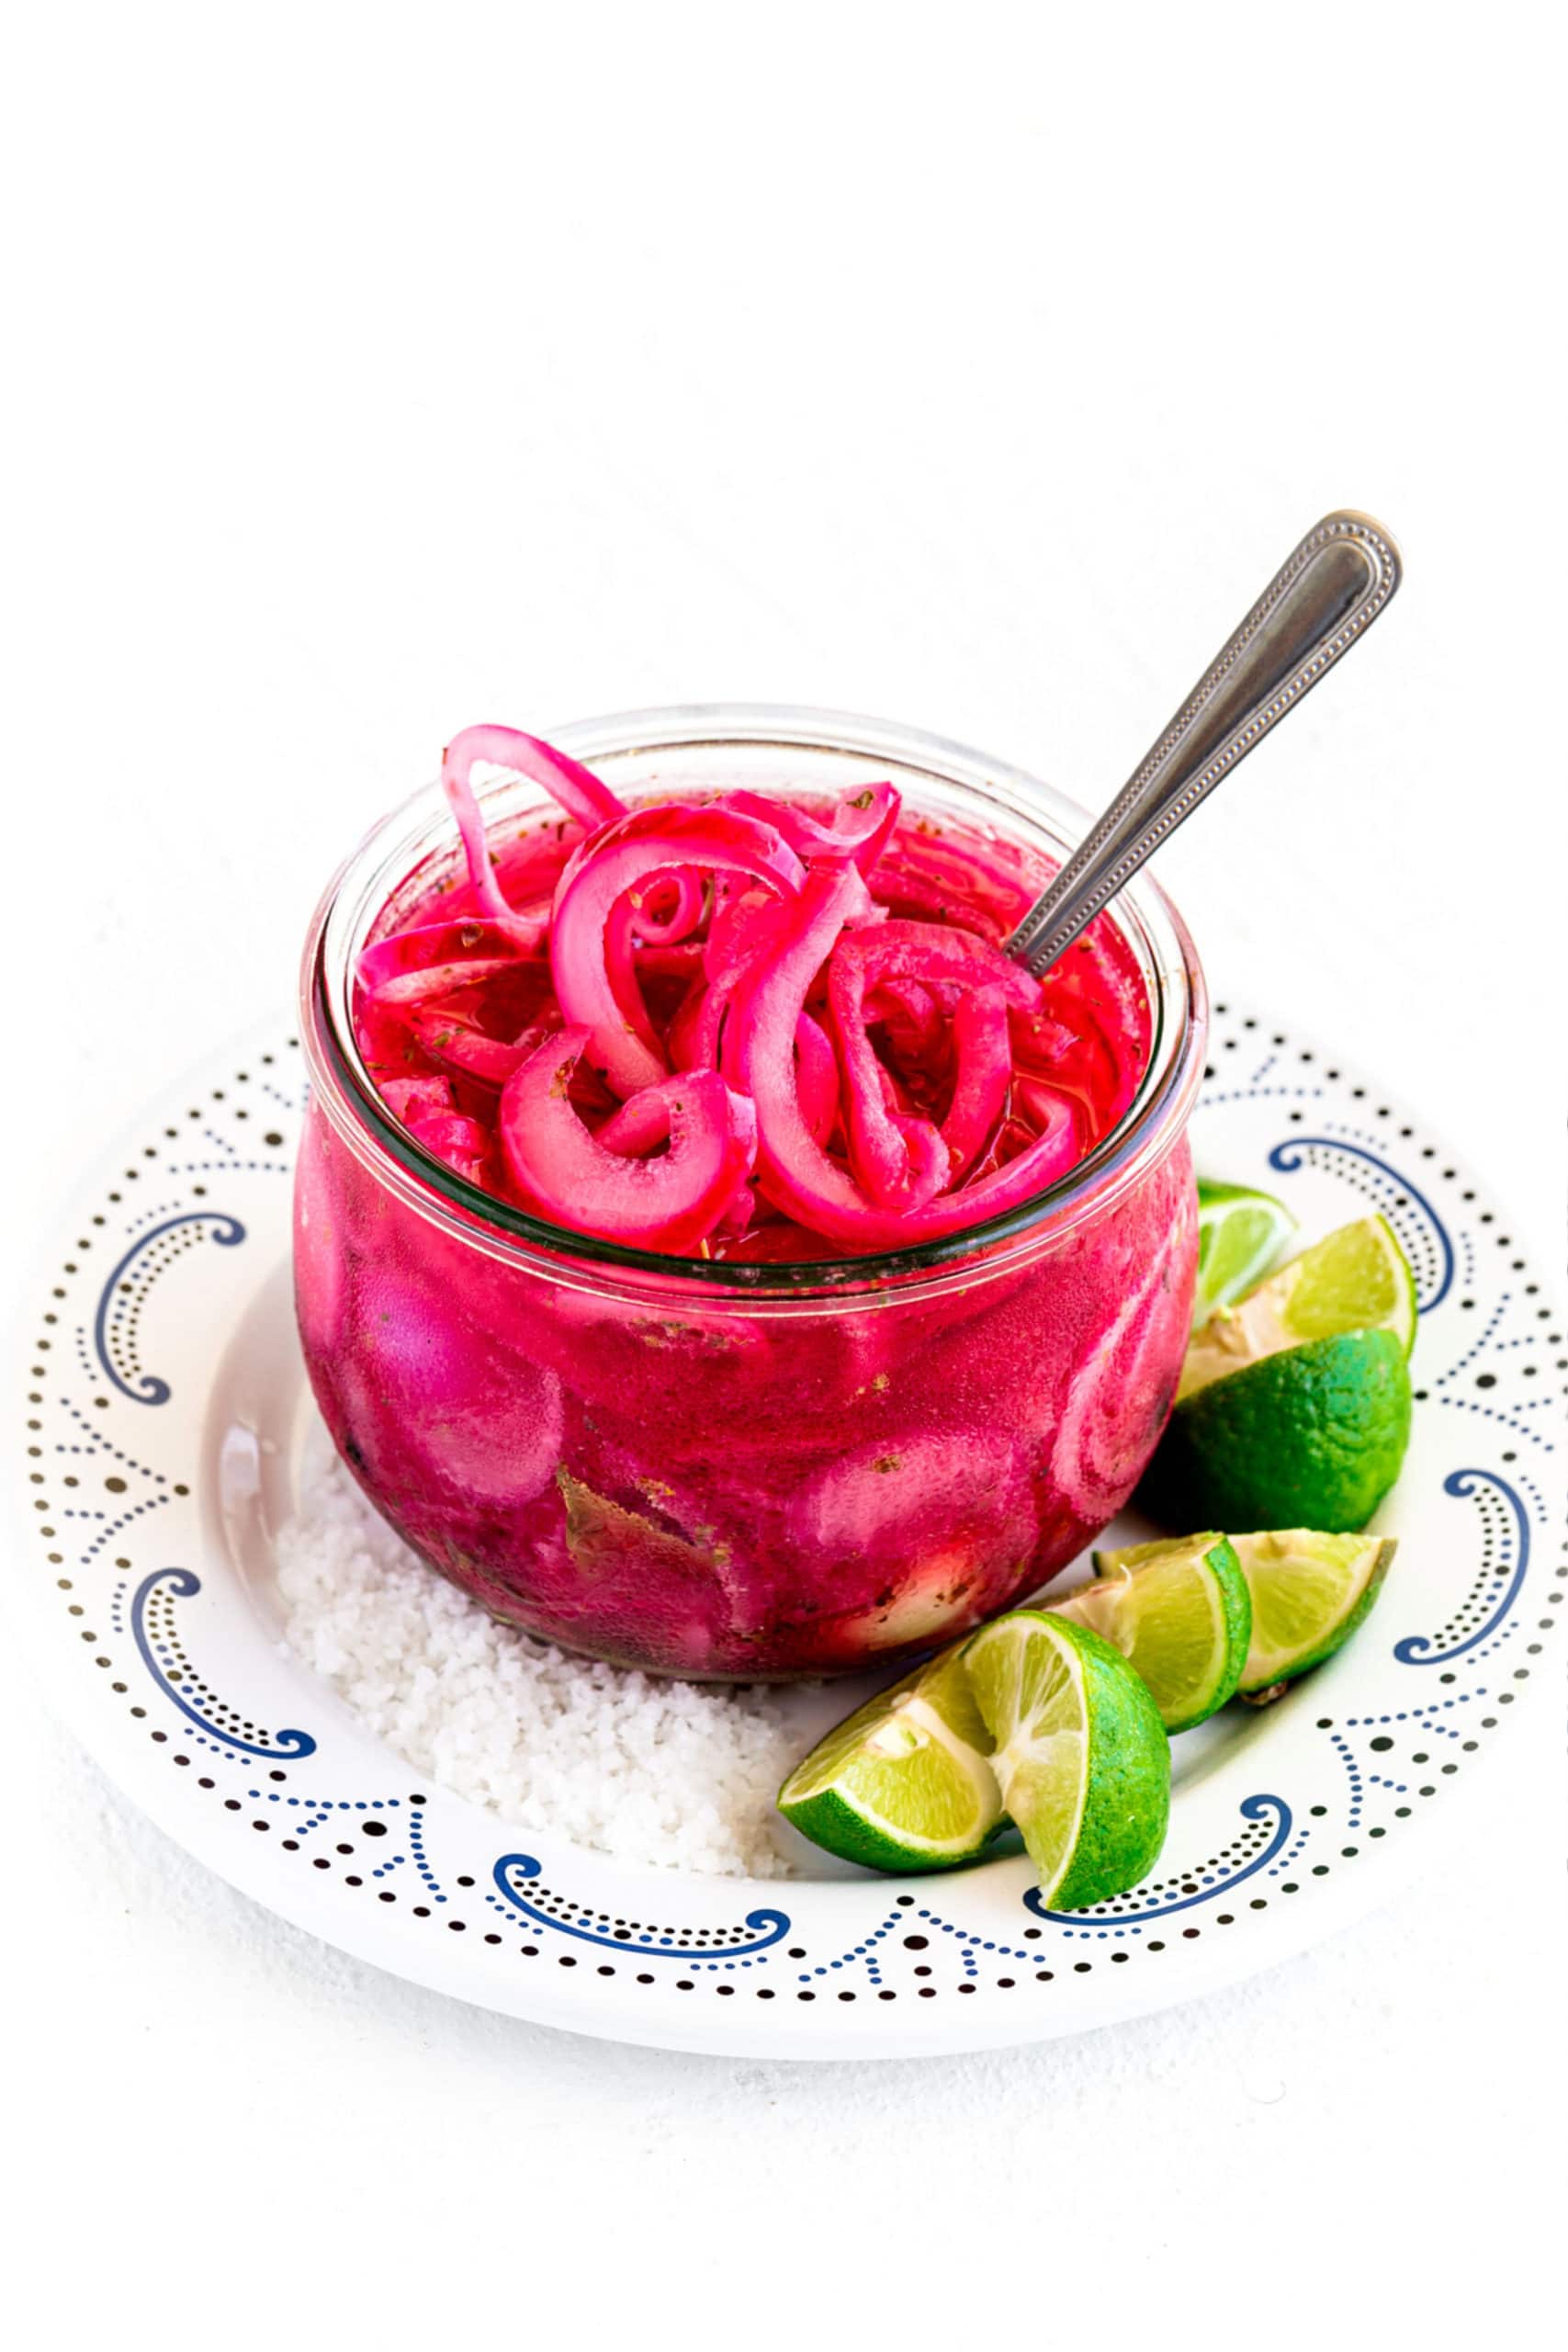 Mexican Pickled Onions, Easy 10-Minute Recipe